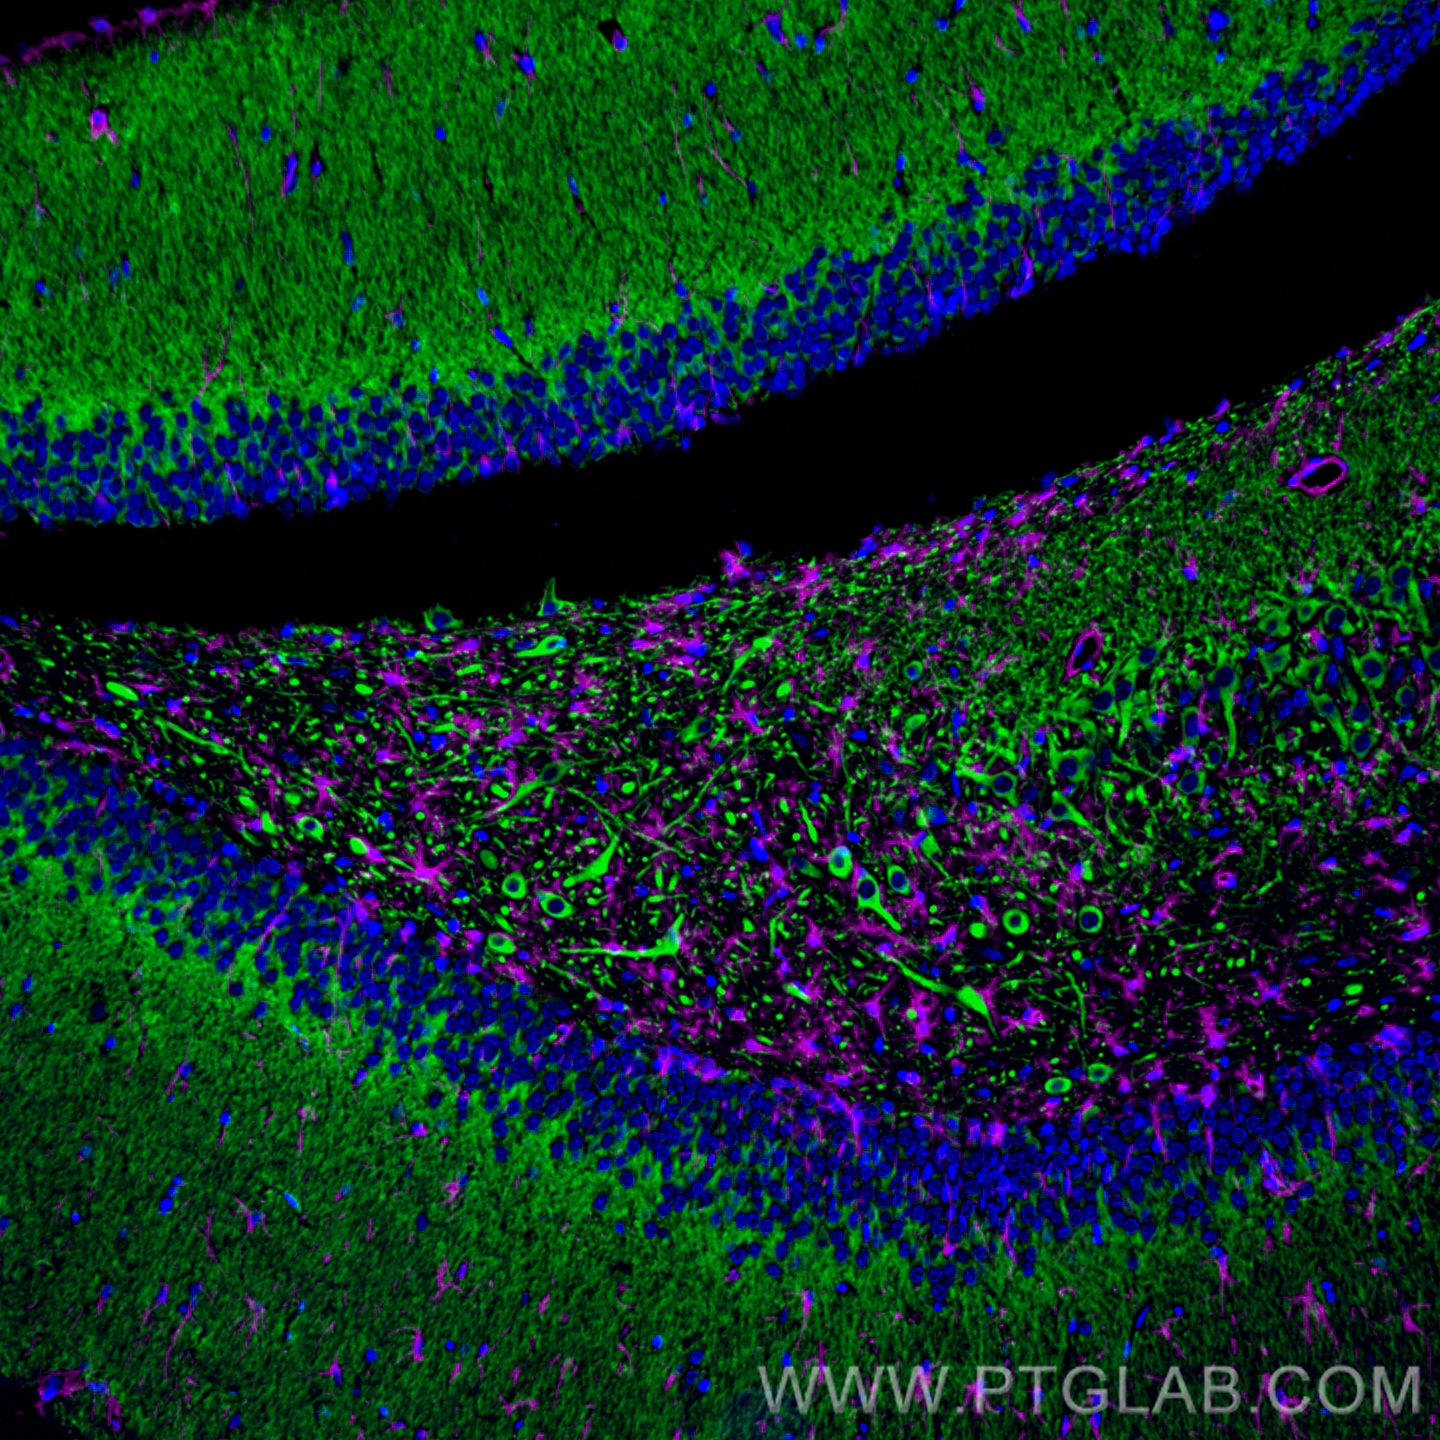 Immunofluorescence of rat brain: FFPE rat brain sections were stained with anti-MAP2 antibody (17490-1-AP, green) labeled with FlexAble HRP Antibody Labeling Kit for Rabbit IgG (KFA005) and Tyramide-488, and anti-GFAP antibody (60190-1-Ig, magenta) labeled with FlexAble HRP Antibody Labeling Kit for Mouse IgG2a (KFA045) and Tyramide-650. Cell nuclei are in blue. 